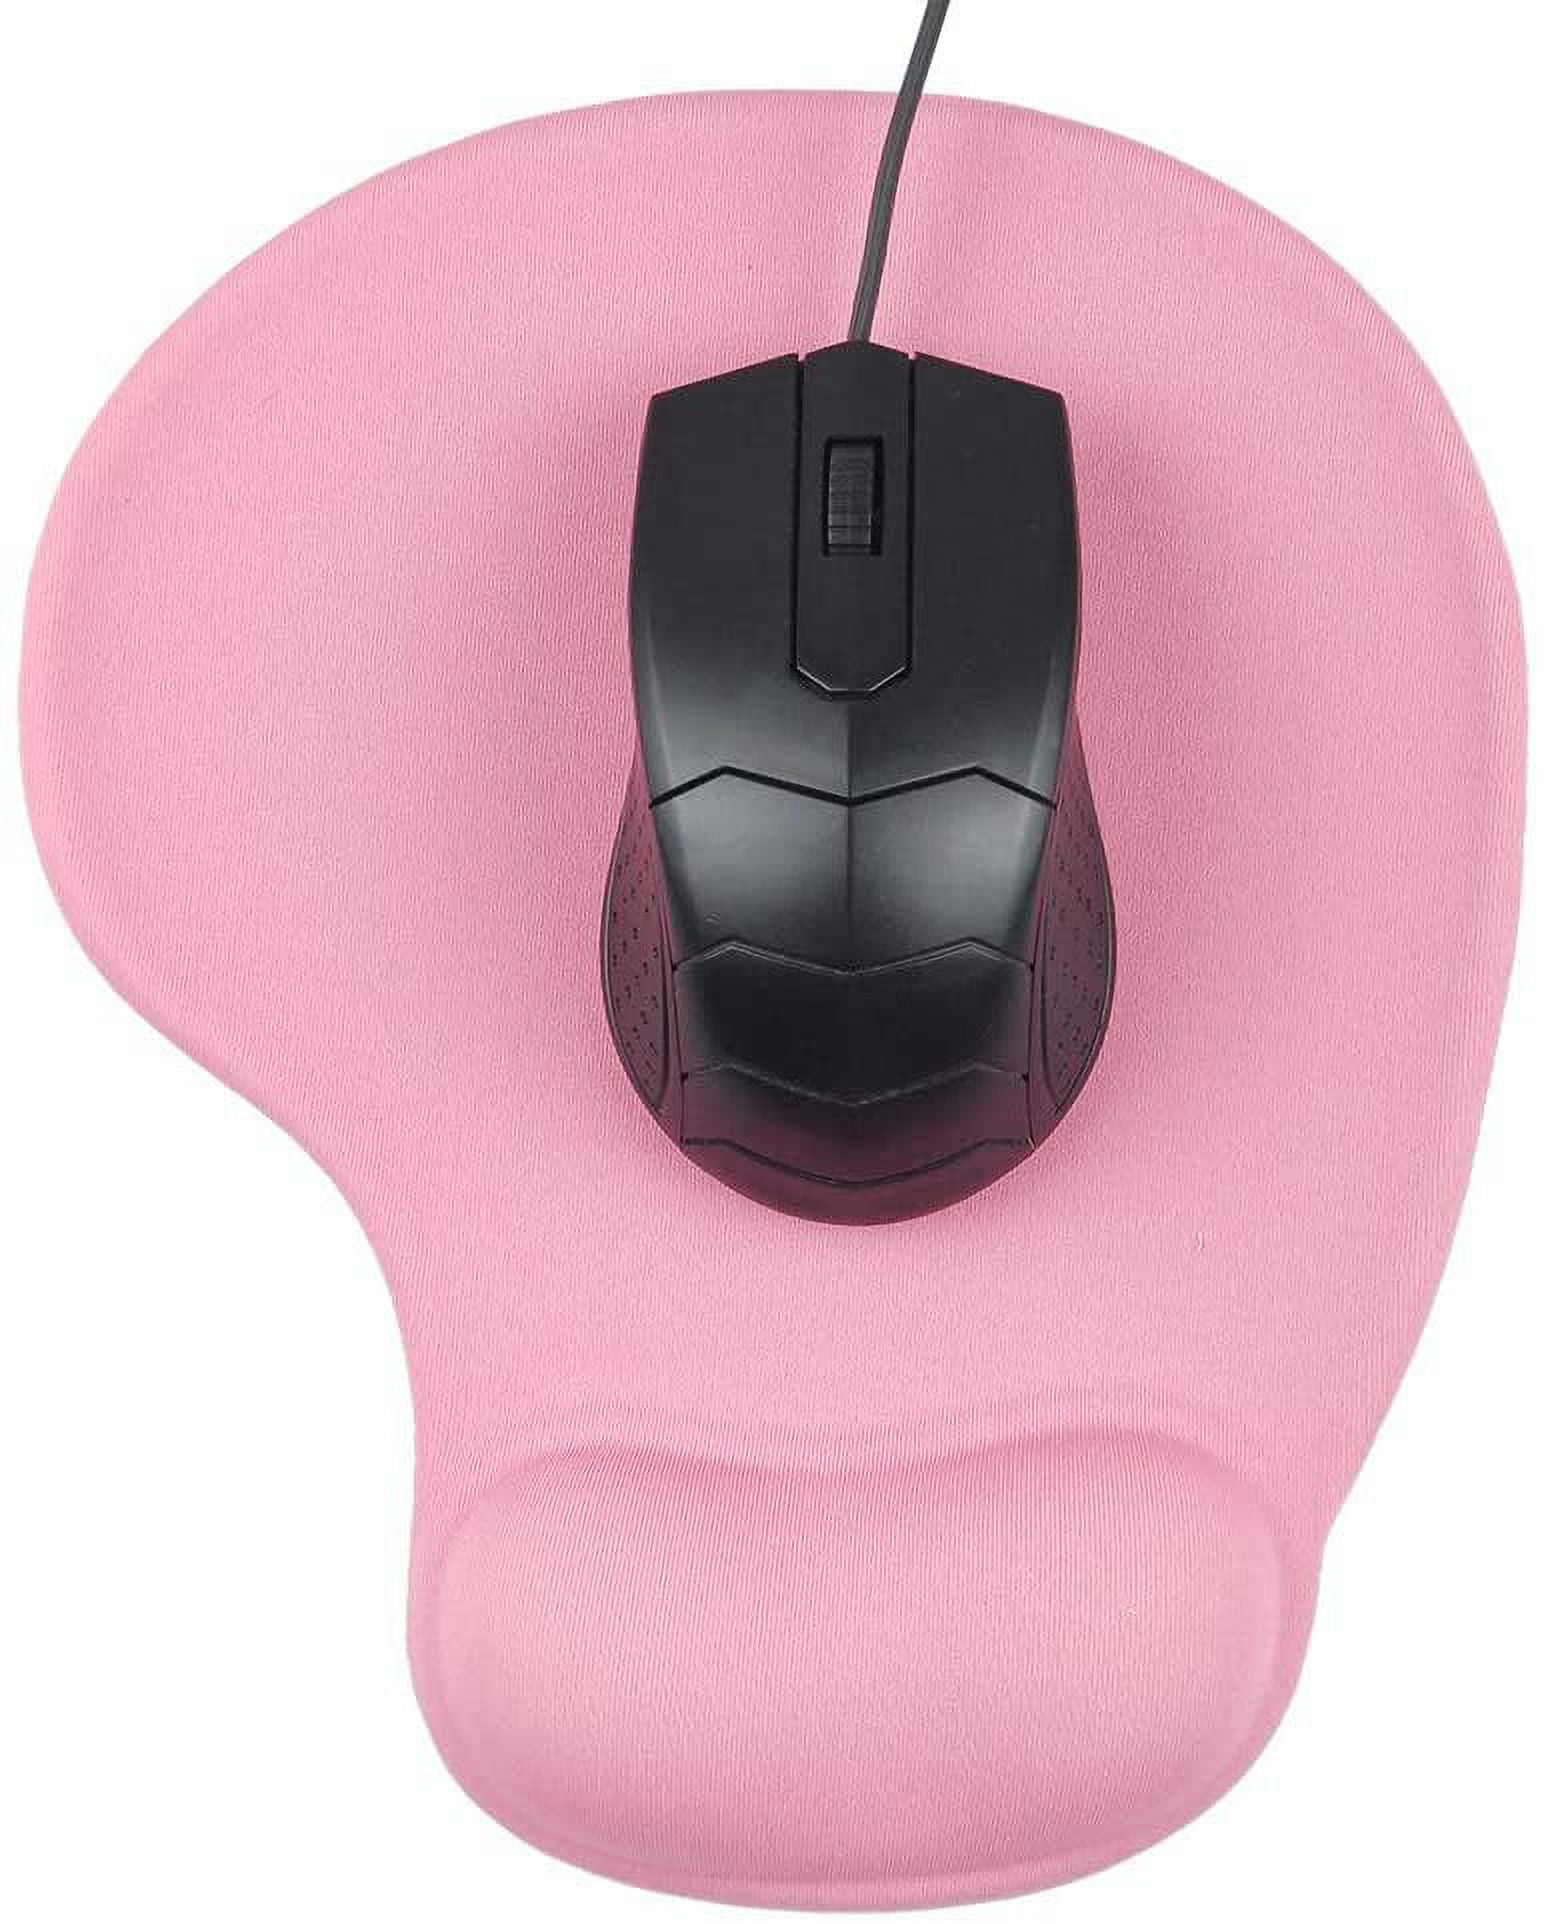 Softskin Gel Mouse Wrist Rest With Mouse pad, IVR51450